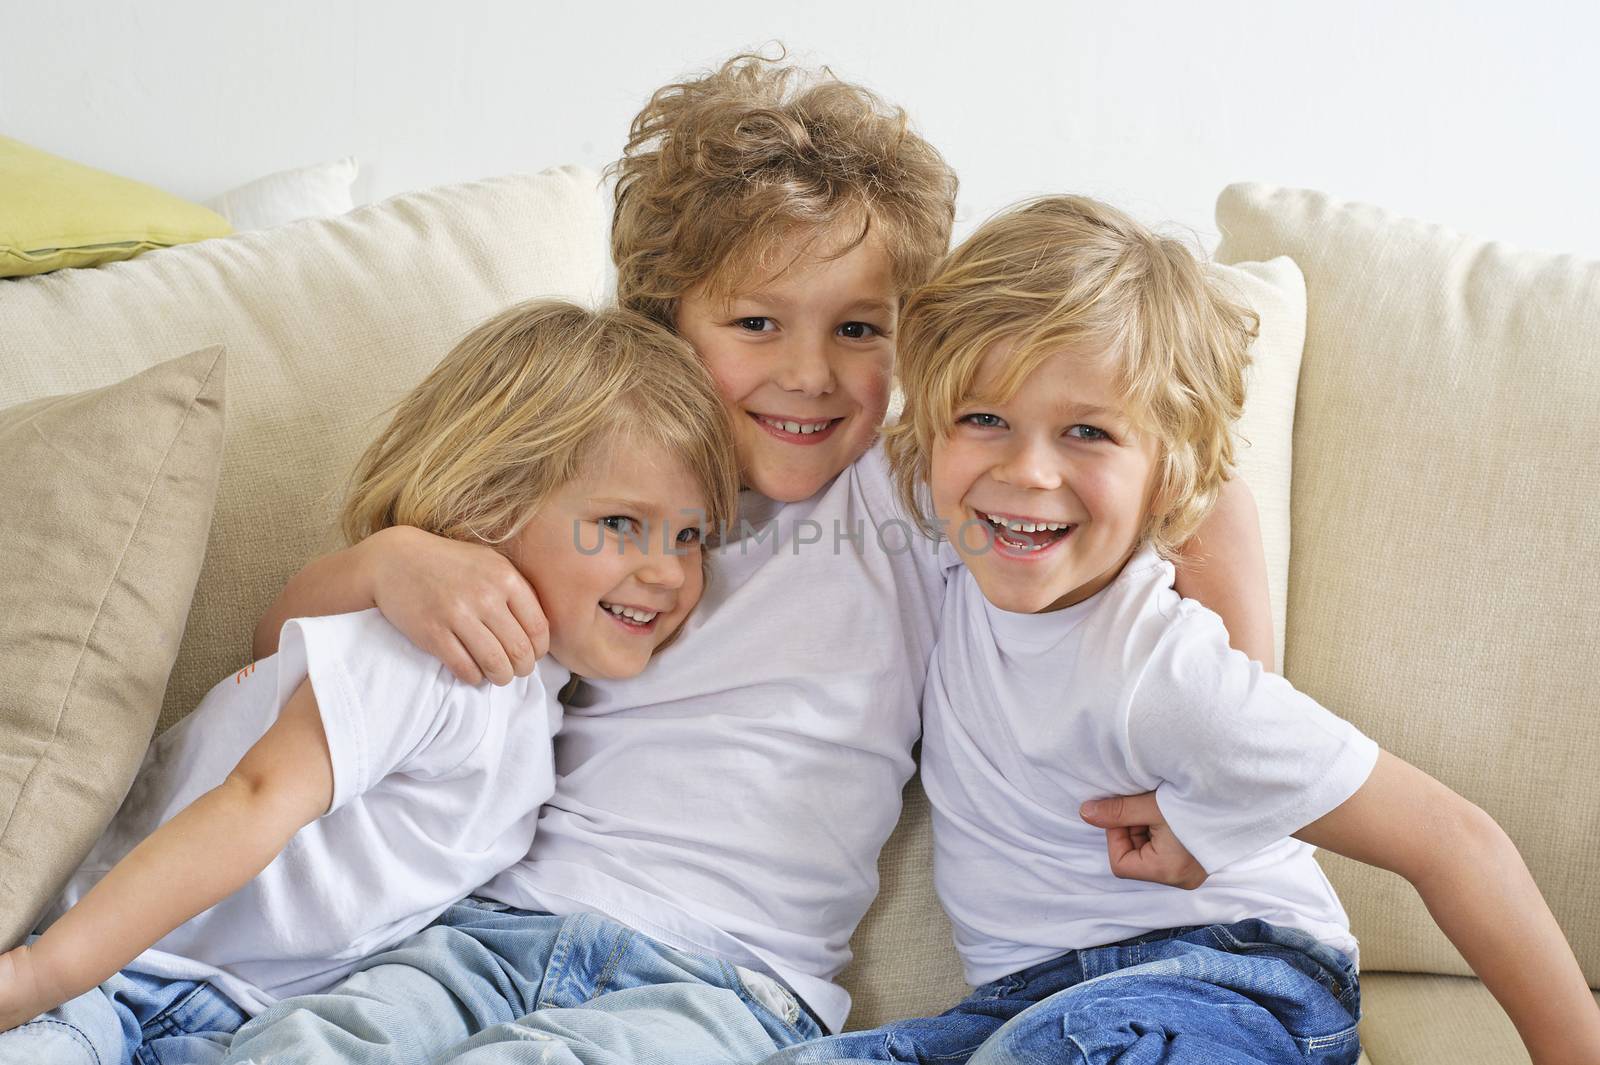 Three brothers hugging and playing on the sofa